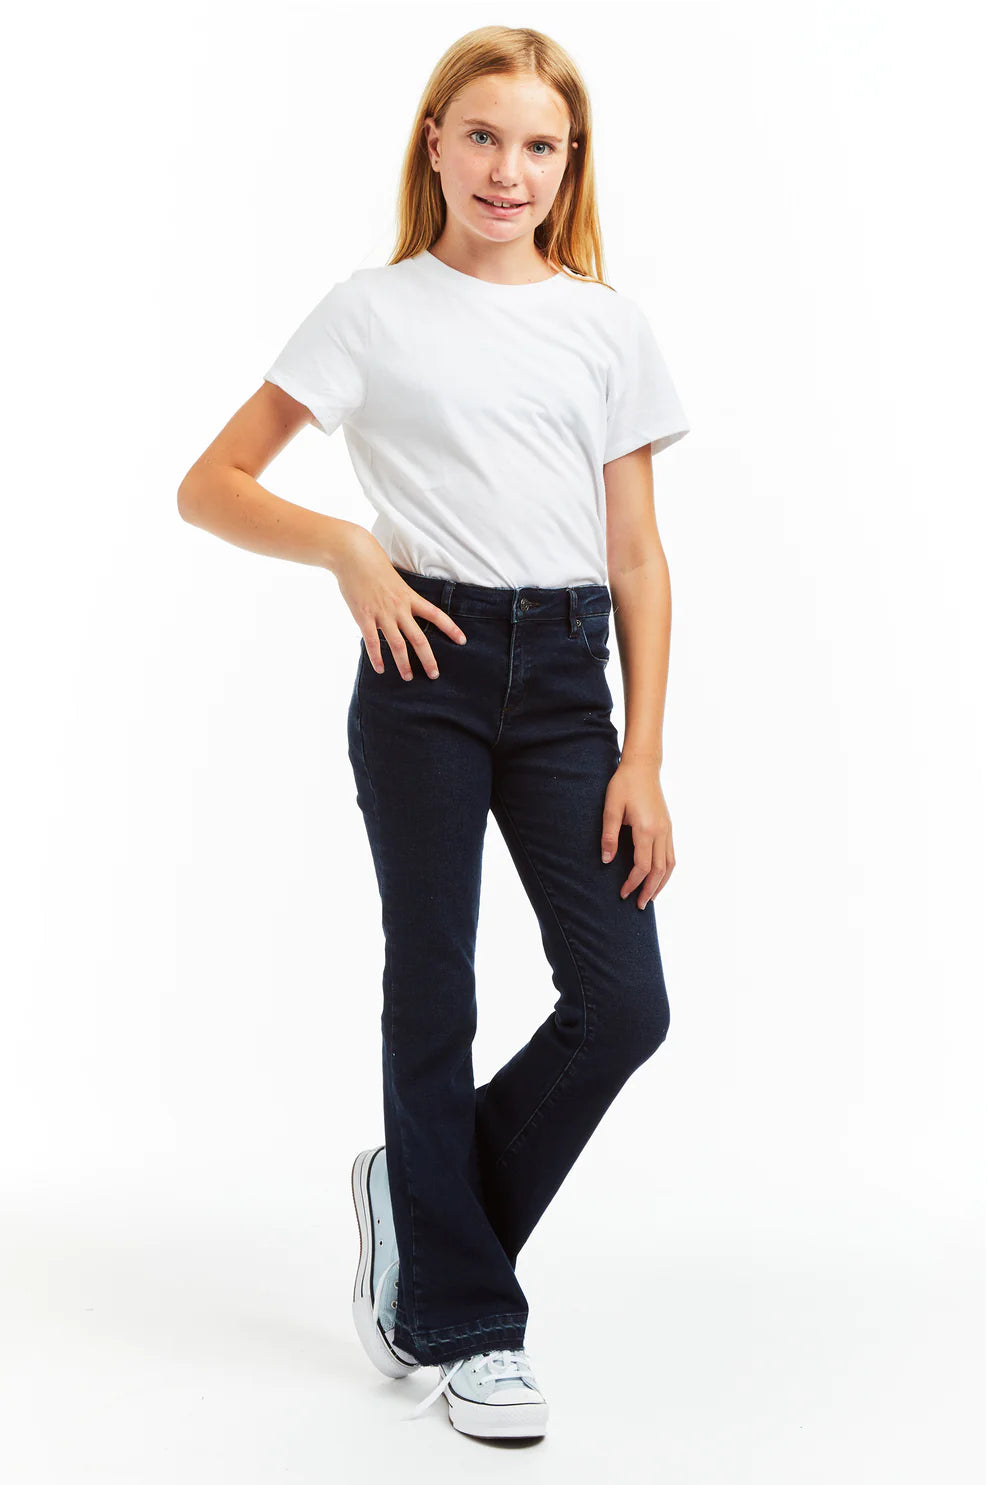 Girls Mid Rise Flare Jeans